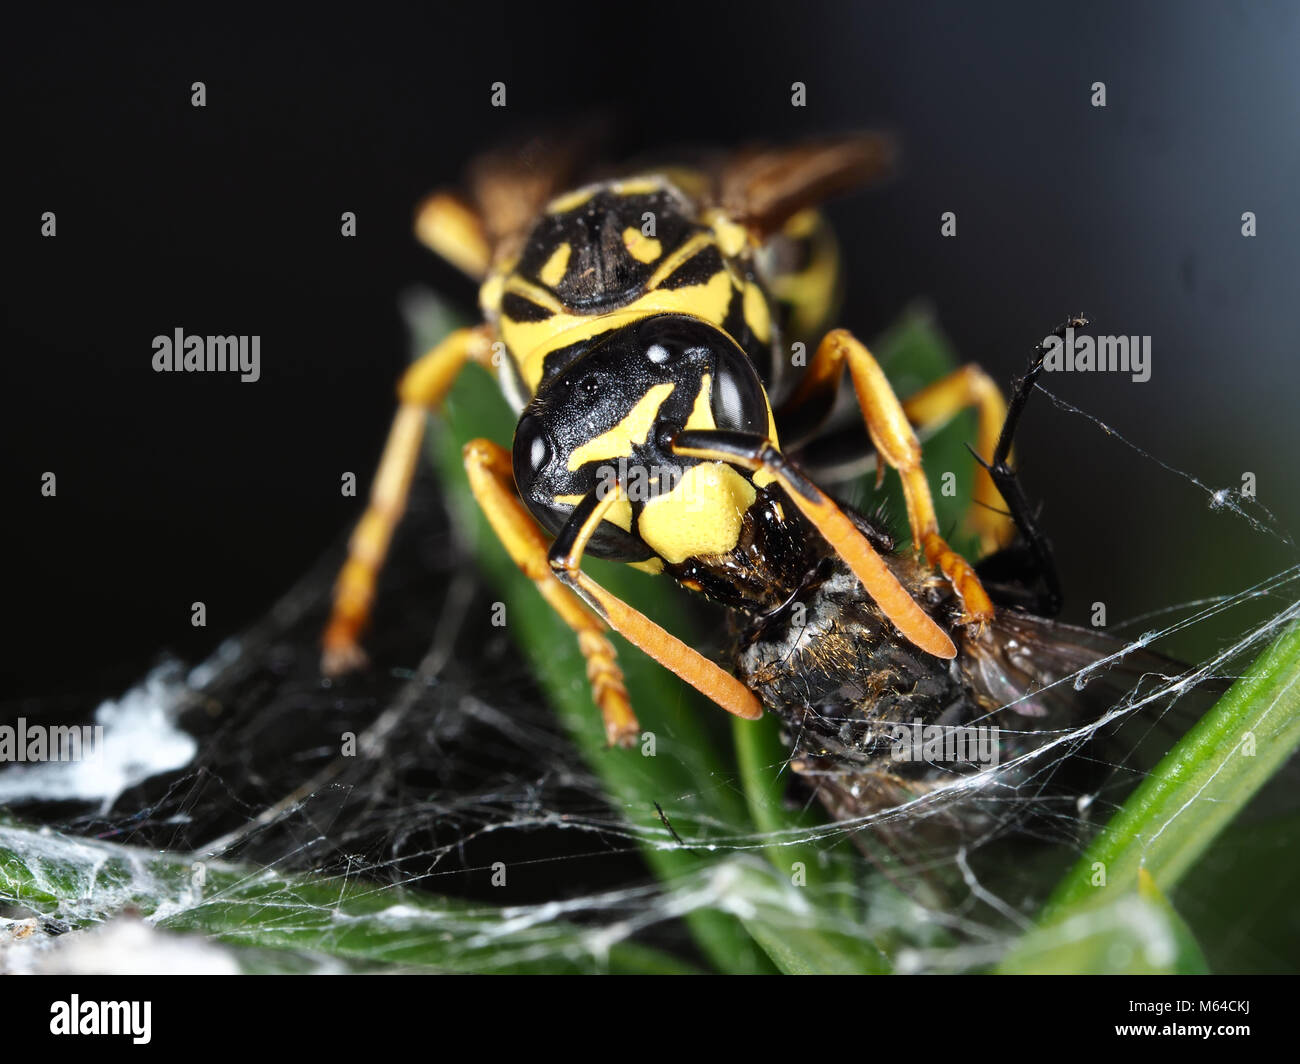 A wasp eating a fly that stuck in a web Stock Photo